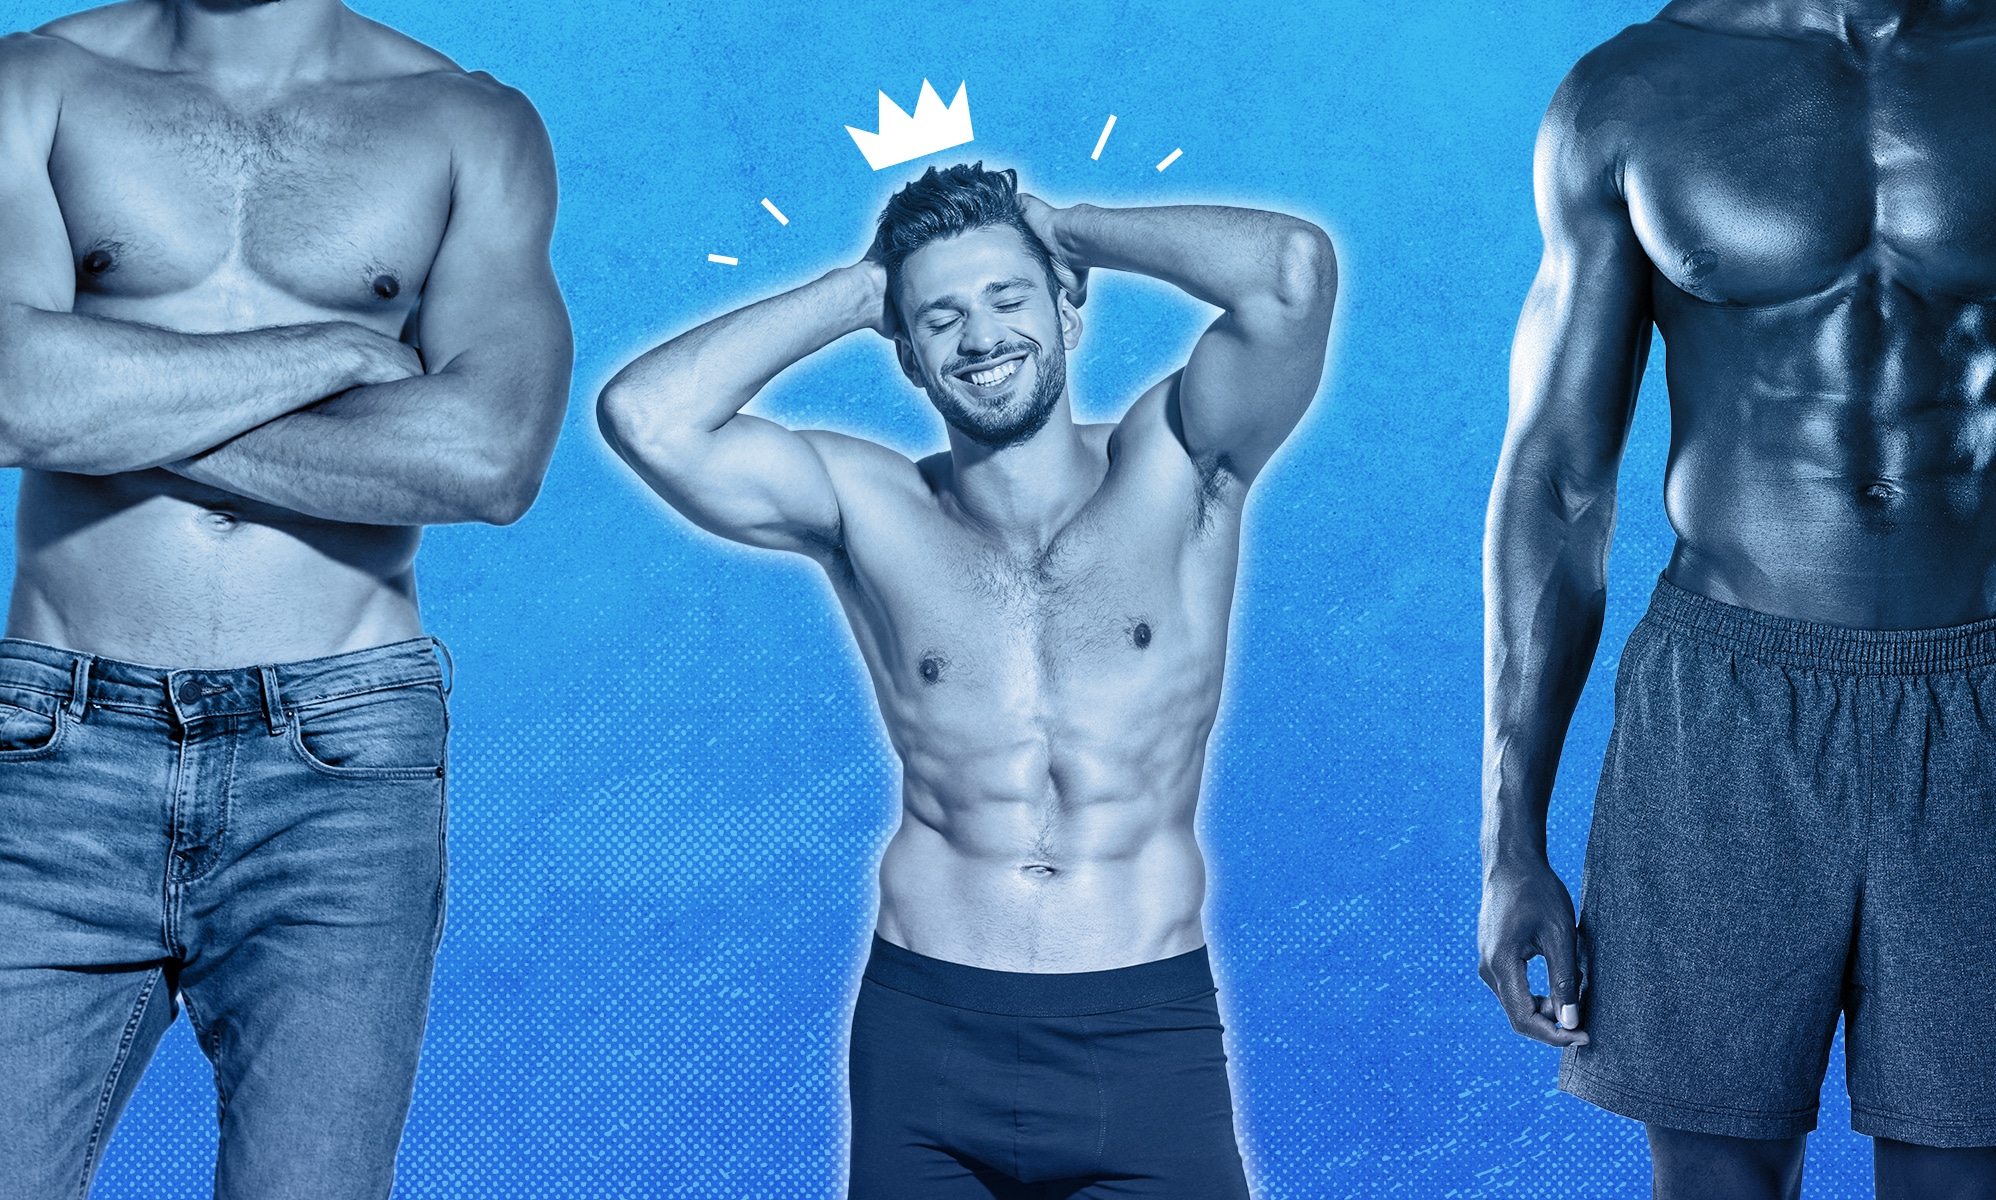 Tall tops and short bottoms: How height became a toxic gay dating ...